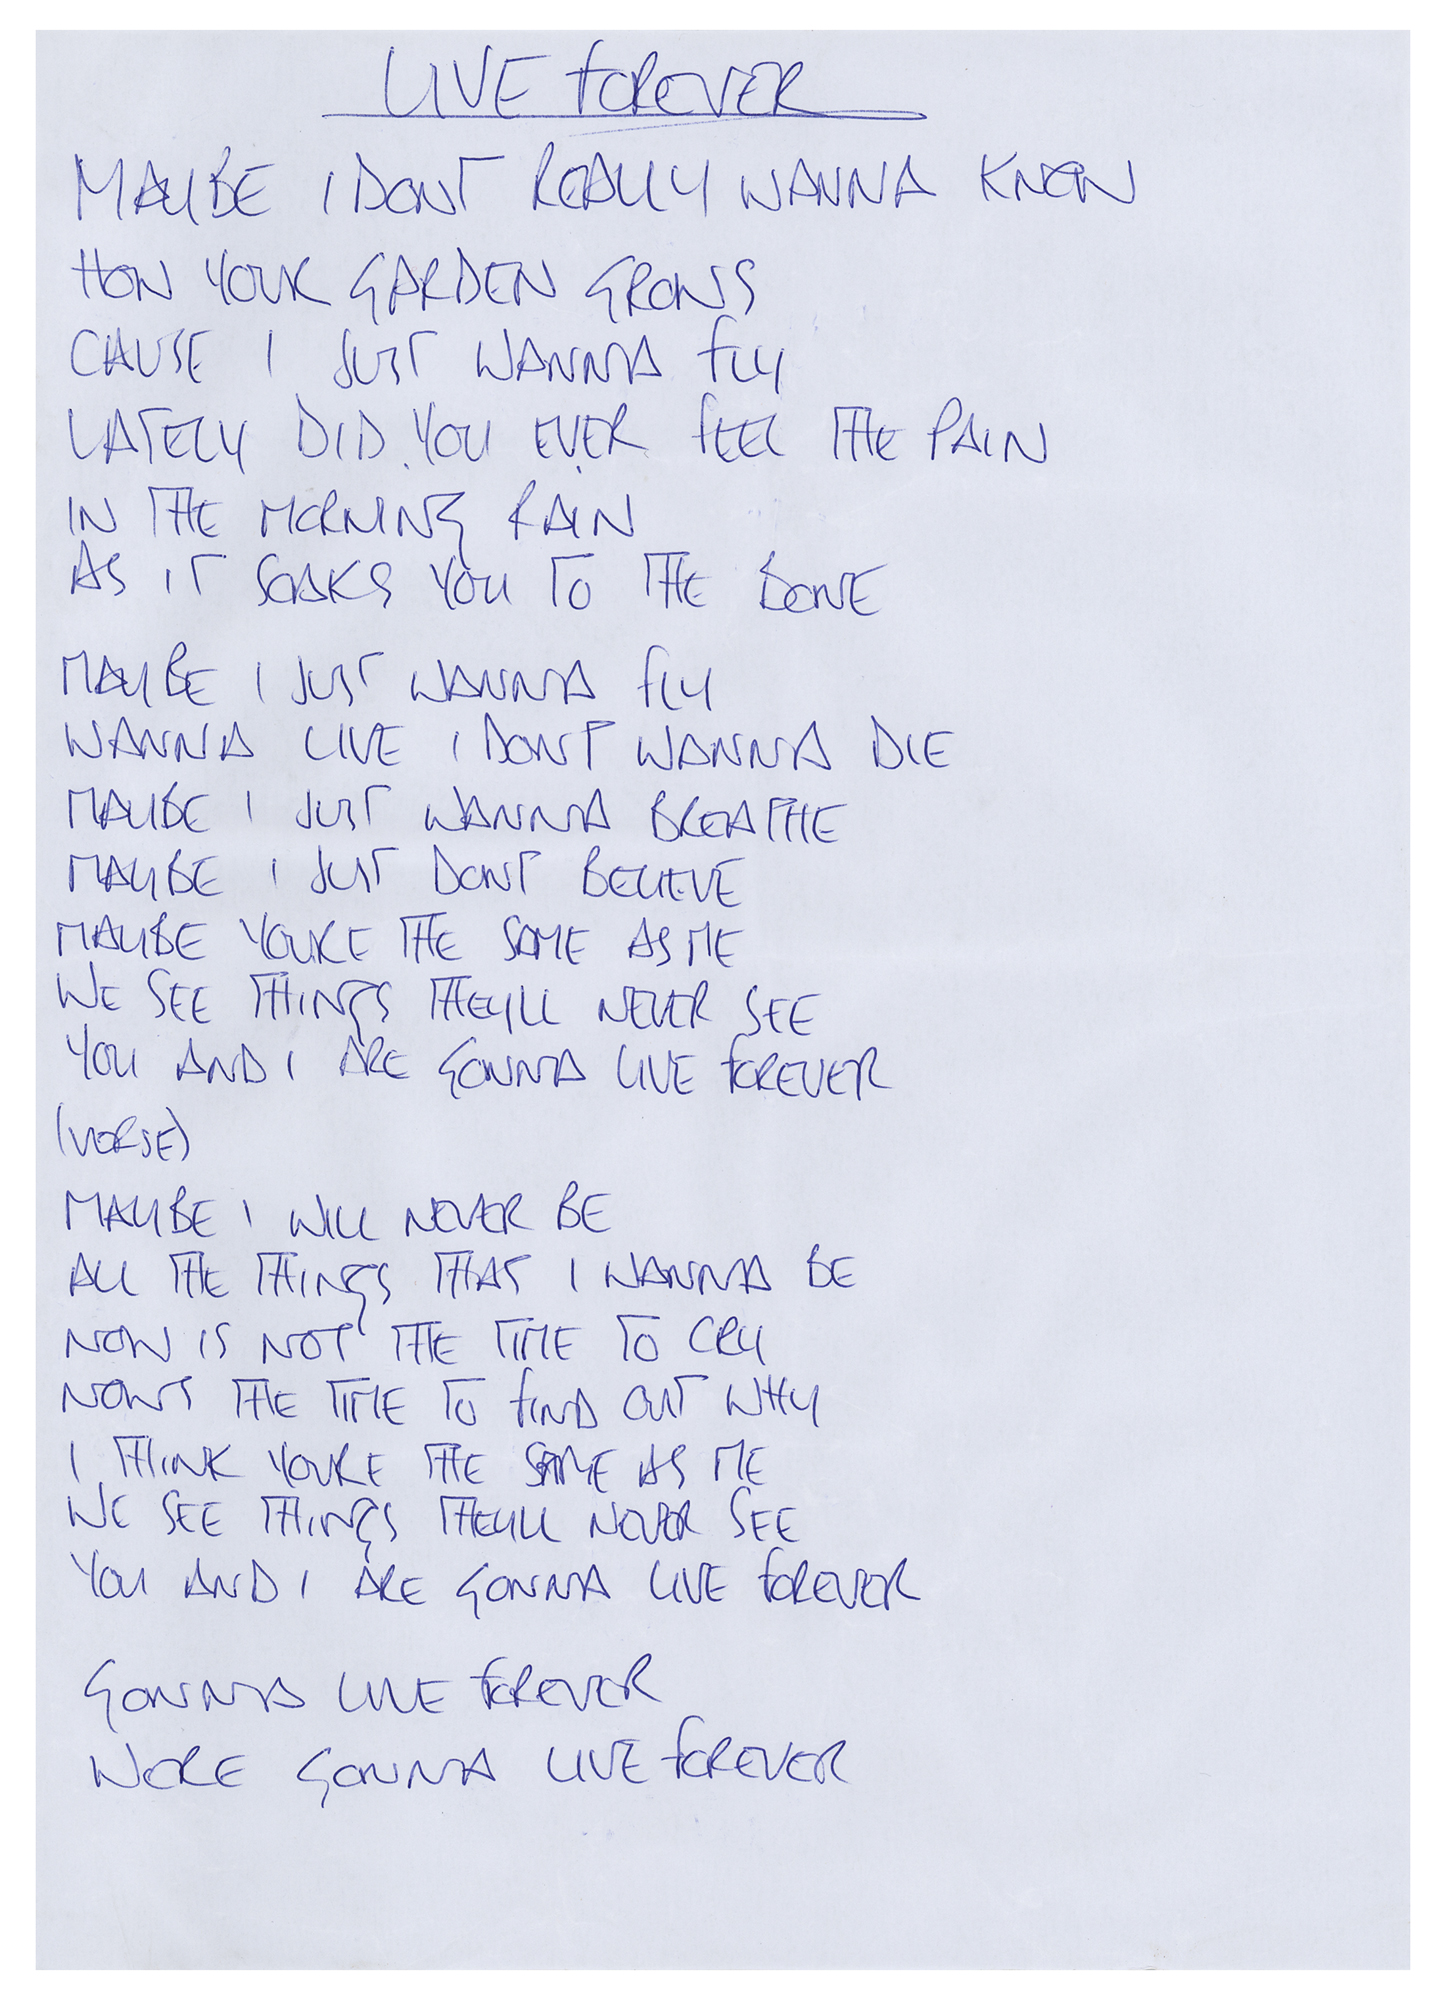 Lot #628 Oasis: Noel Gallagher Handwritten Lyrics (13) for Definitely Maybe, with CD Signed by the Gallagher Brothers - Image 9